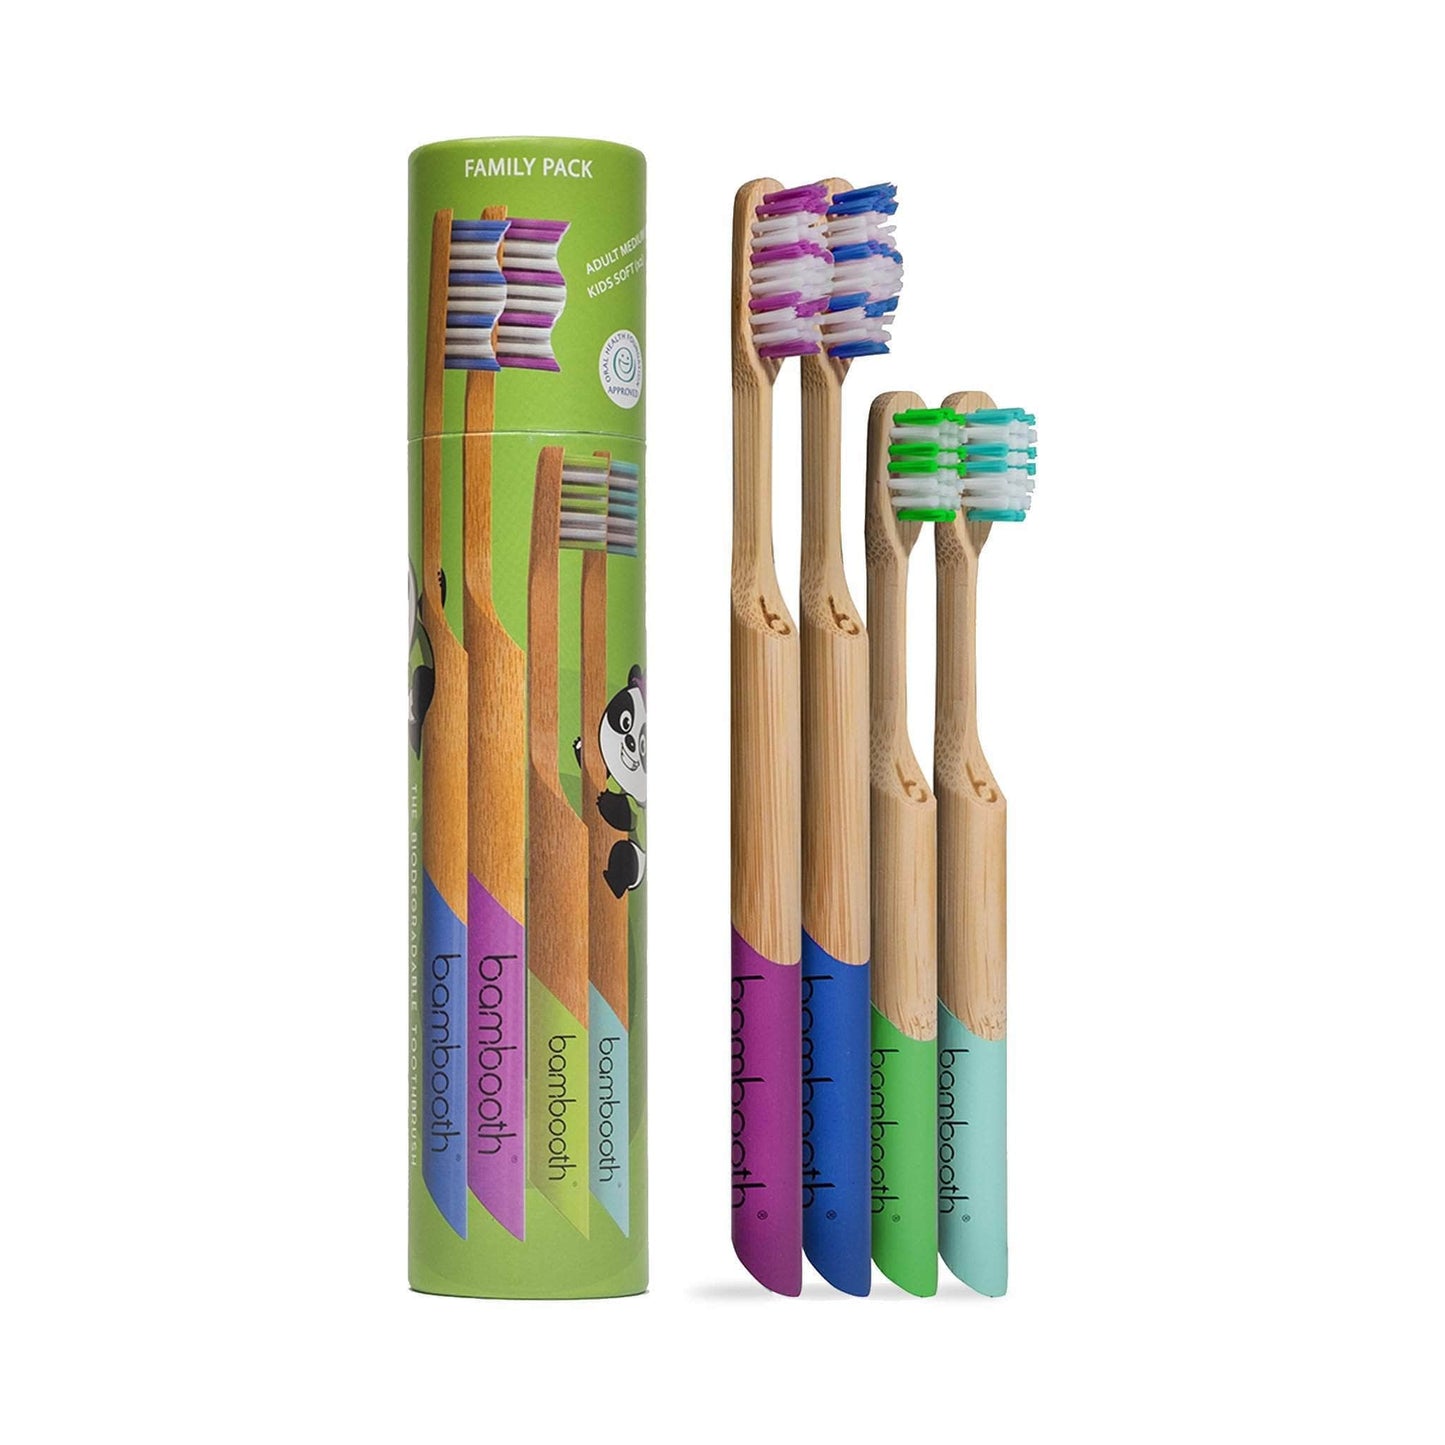 Bambooth Toothbrush Bamboo Toothbrush Family Multipack - Bambooth